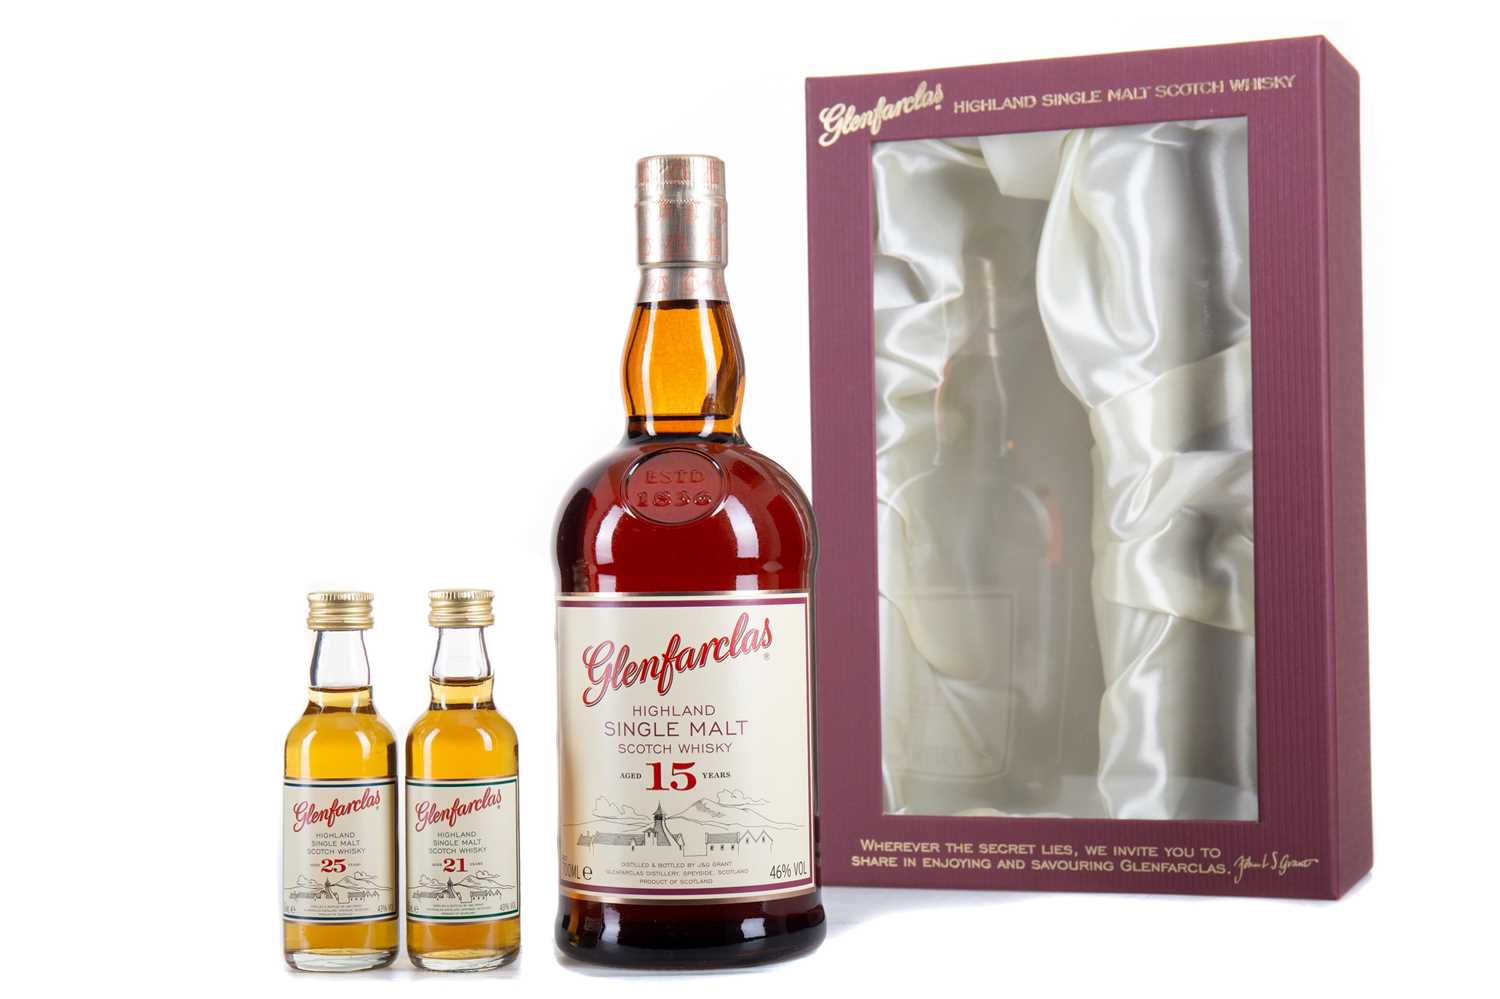 Lot 171 - GLENFARCLAS 15 YEAR OLD WITH 21 & 25 YEAR OLD MINIATURES